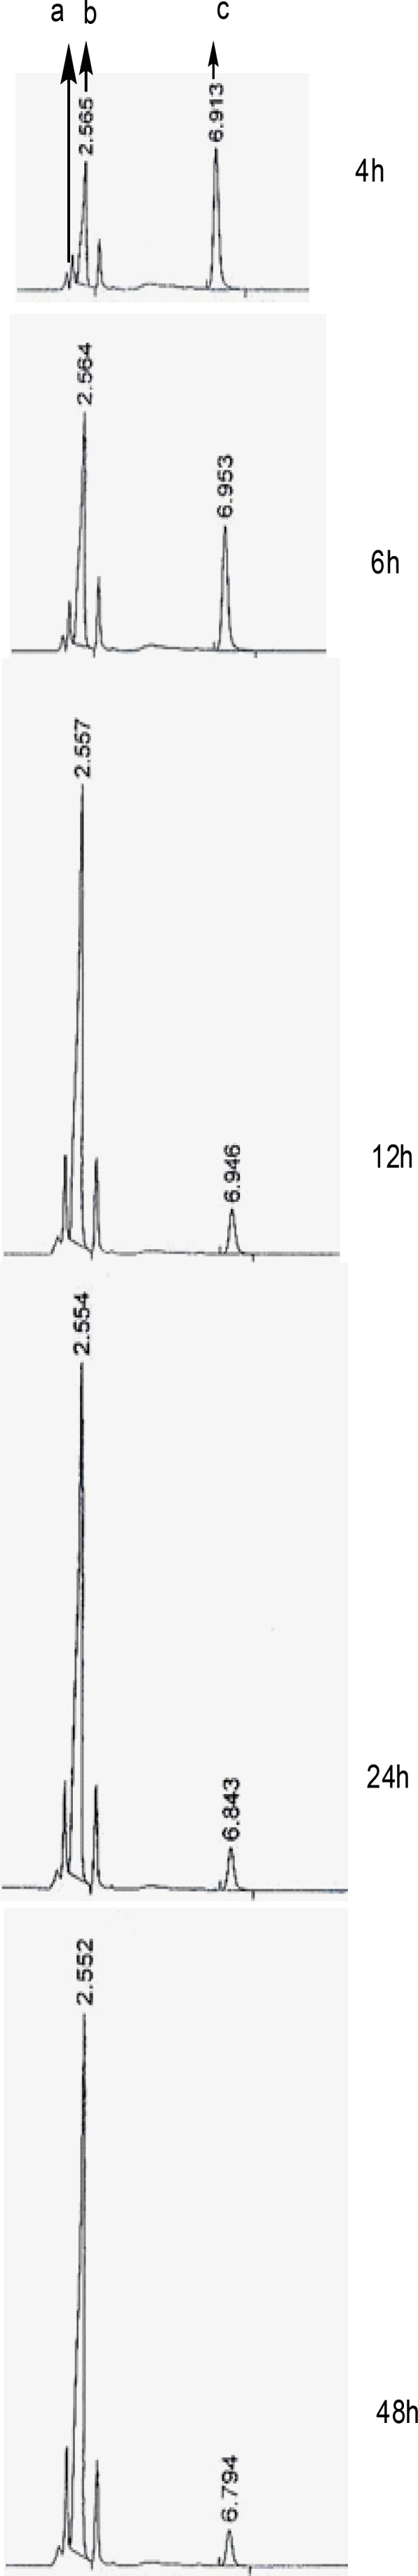 RP-HPLC chromatograms for the elimination of toluenesulfinic acid from compound IV to give V (sampling was performed at 4, 6, 12, 24 and 48 h after starting the reaction).